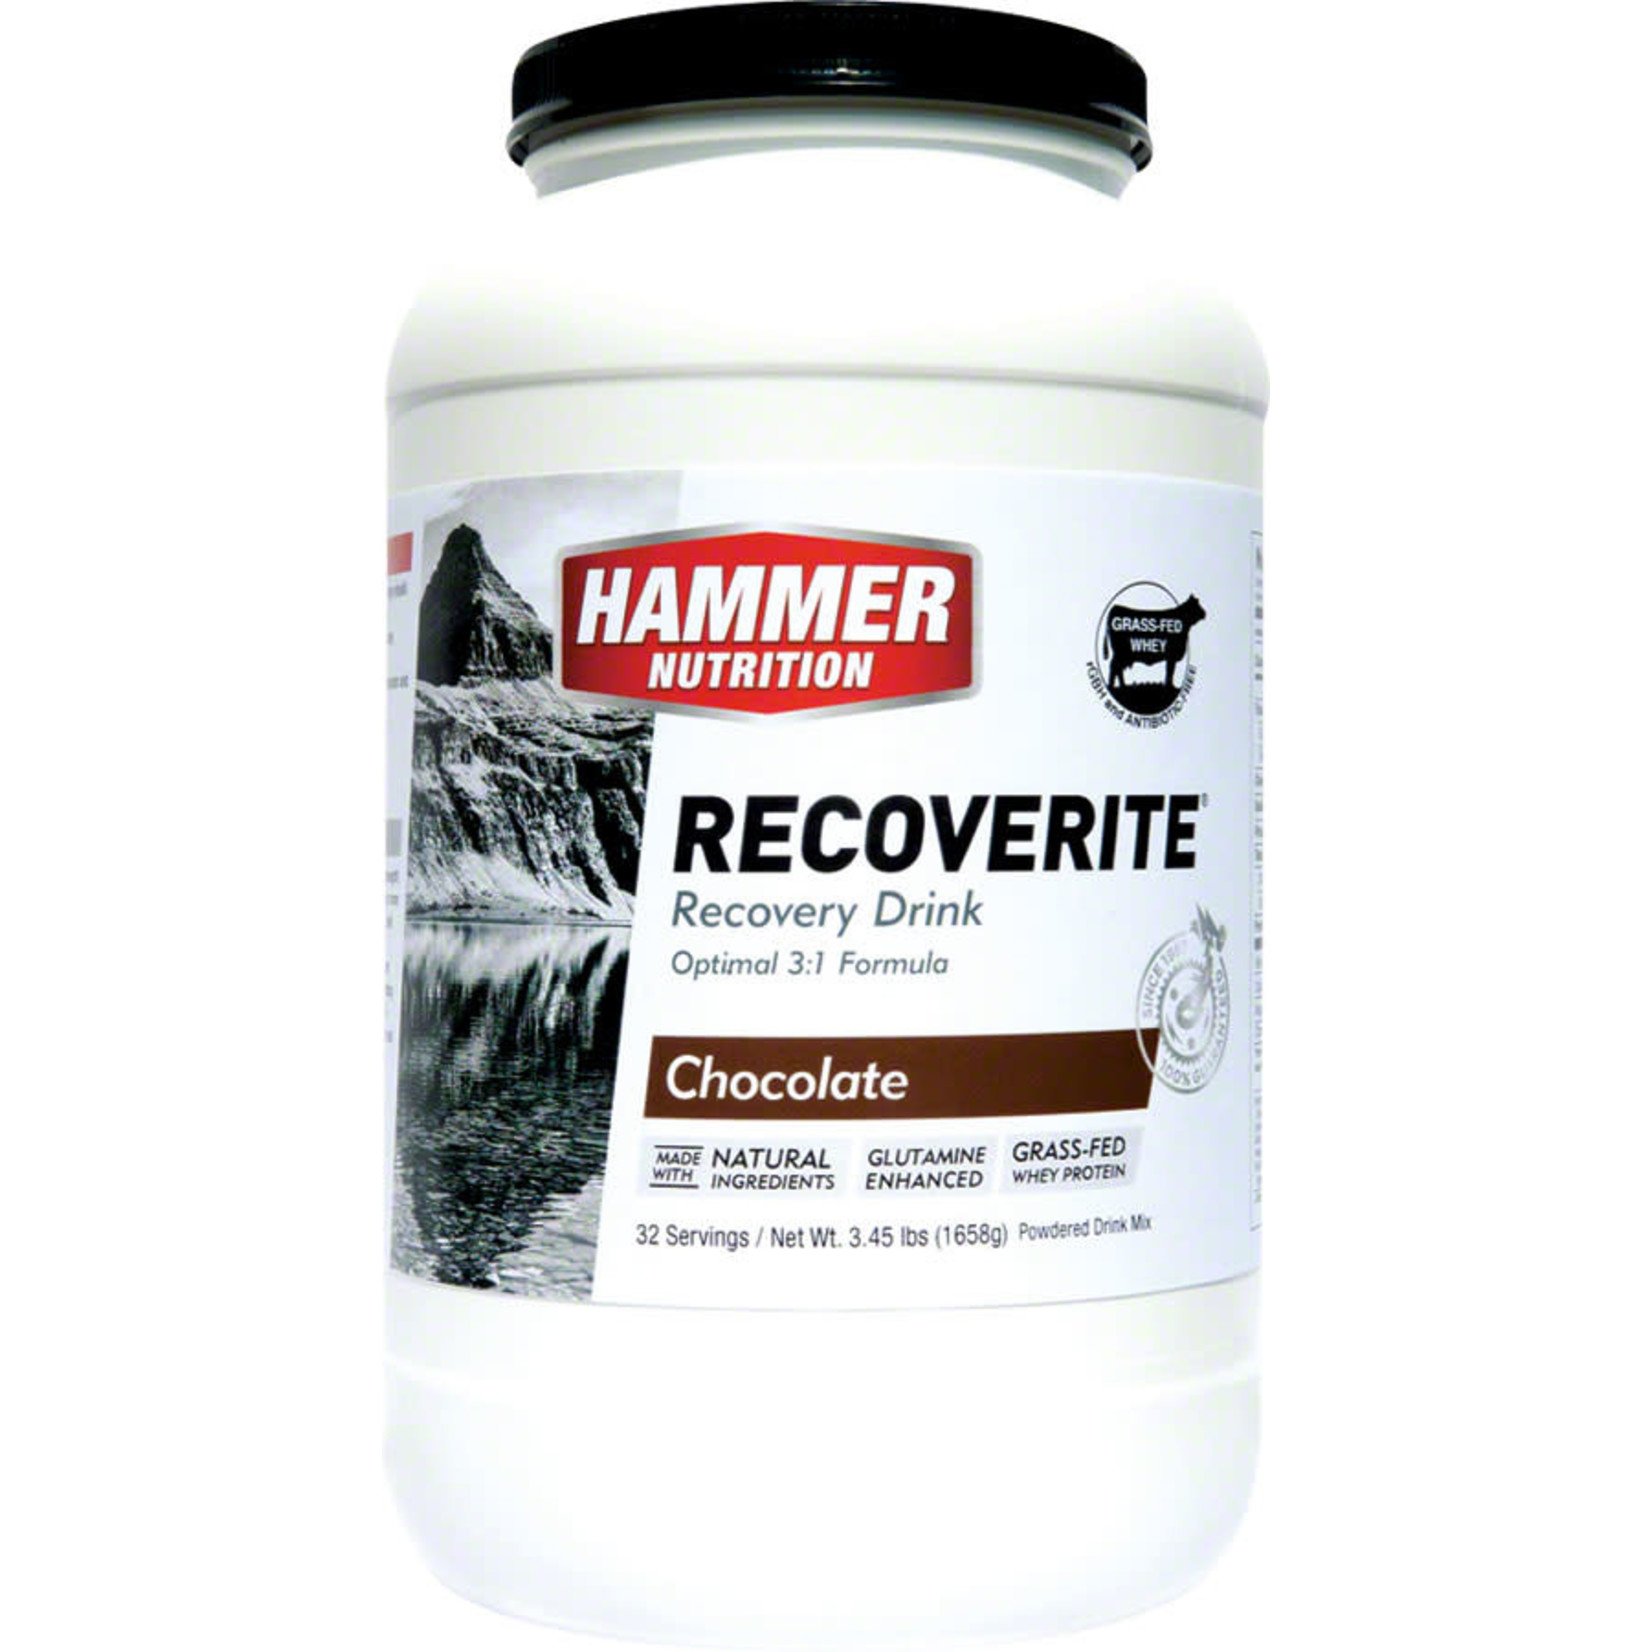 Hammer Nutrition Recoverite 32 Servings